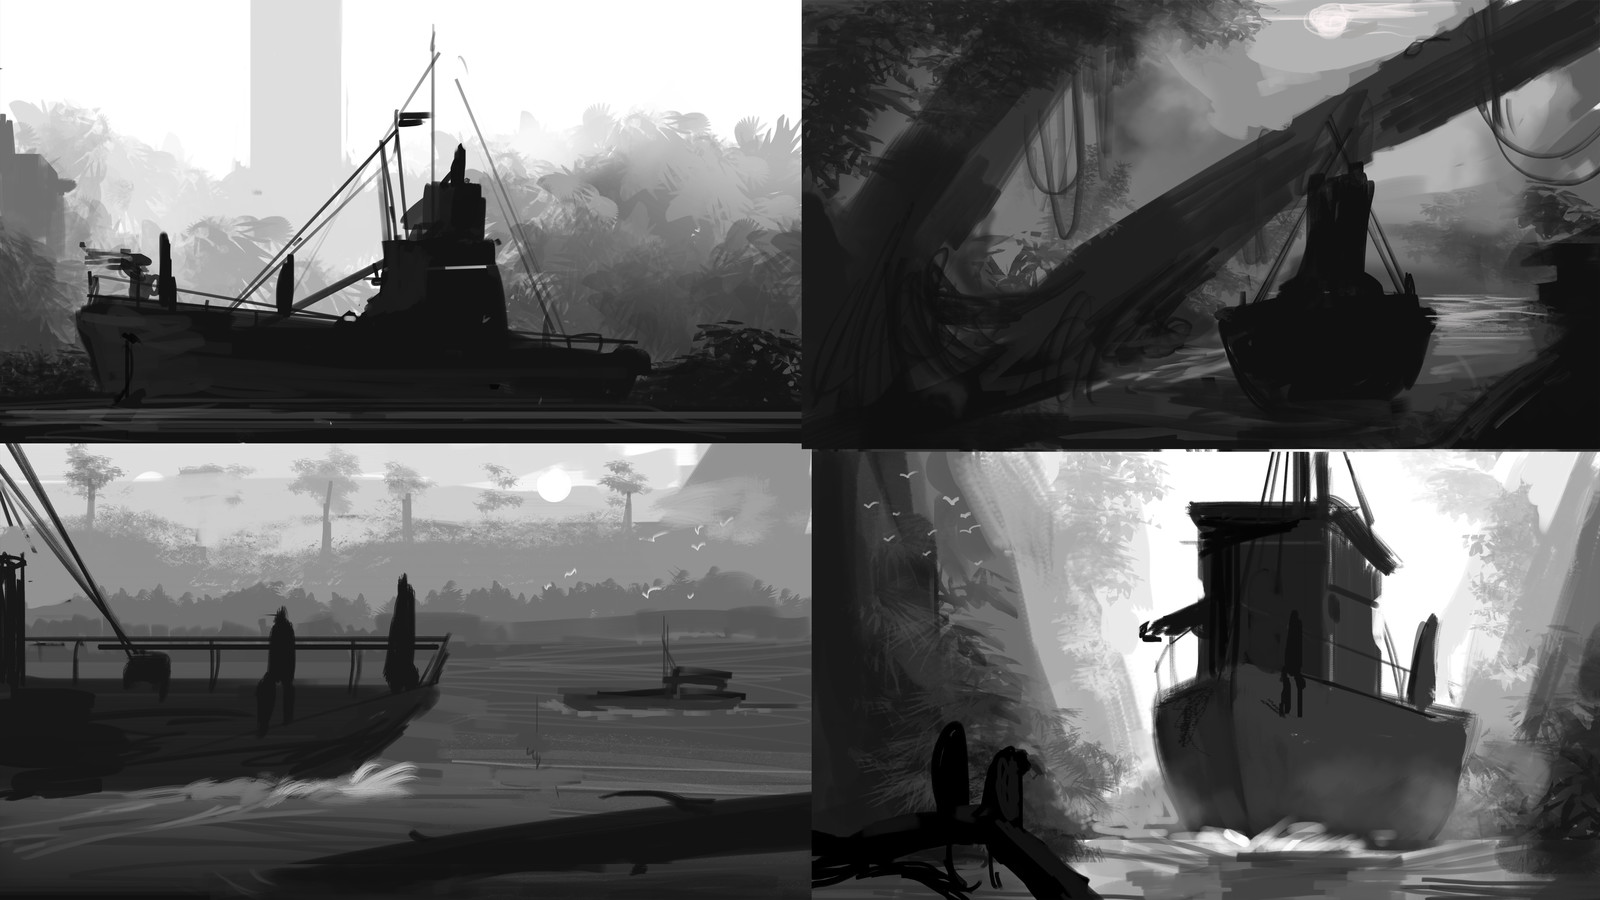 Initial thumbnailing process, went with bottom right